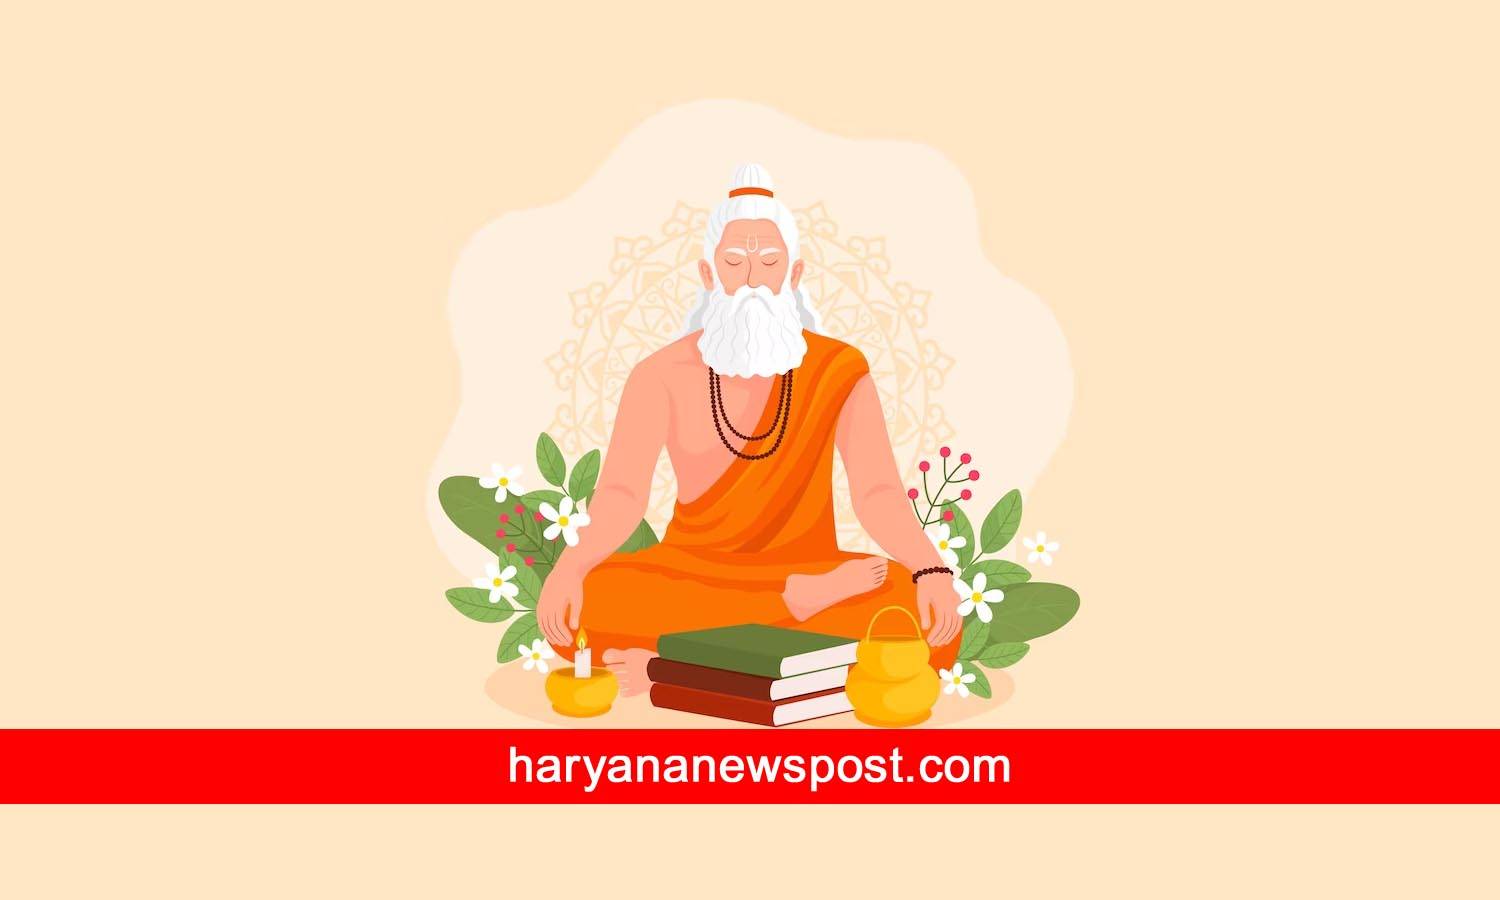 Happy Valmiki Jayanti 2023 Wishes, Quotes, Messages, WhatsApp And Facebook Status To Share On This Auspicious Day